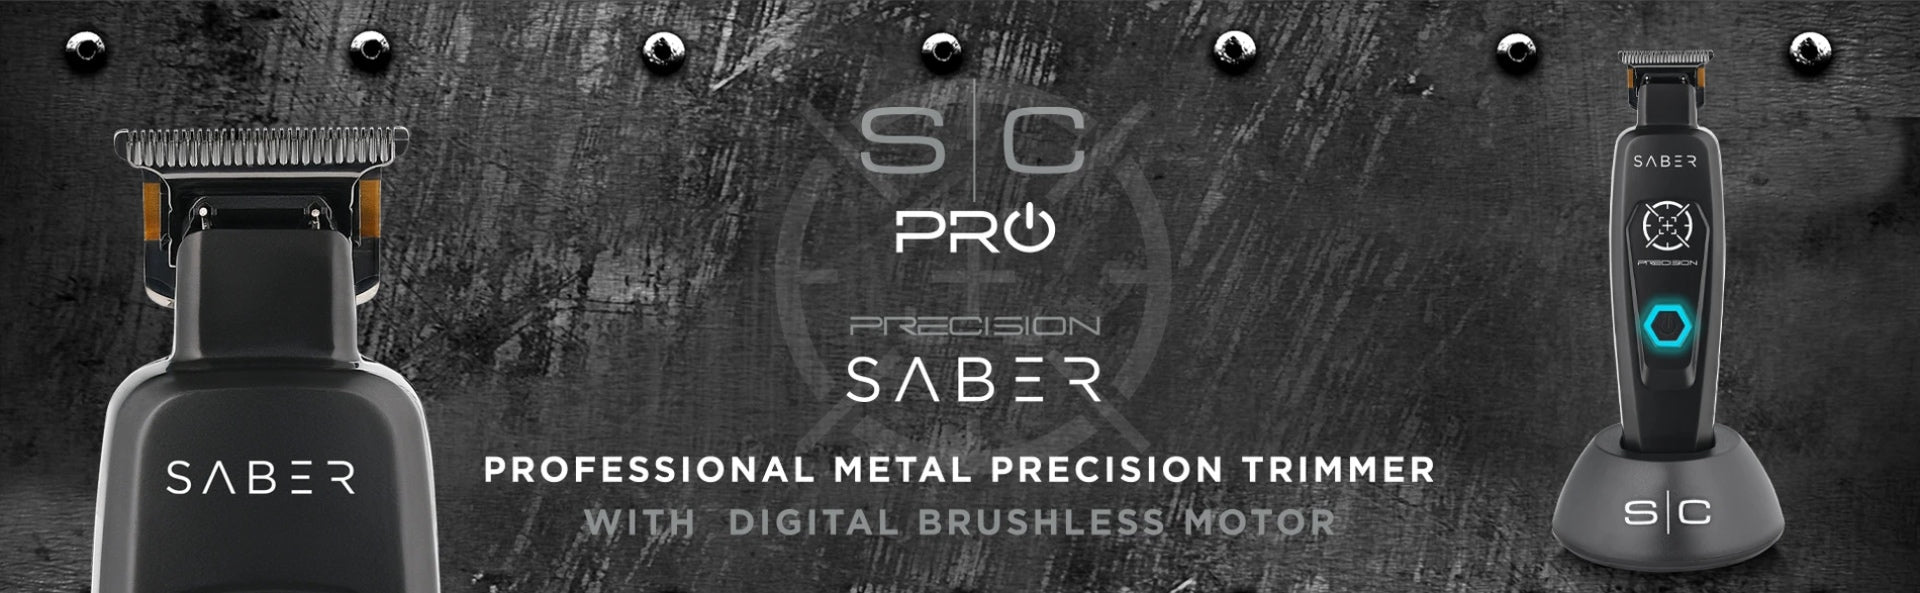 Precision Saber Hair Trimmer with Full Metal Body and Digital Brushless Motor - Ultimate Grooming Tool for Professionals